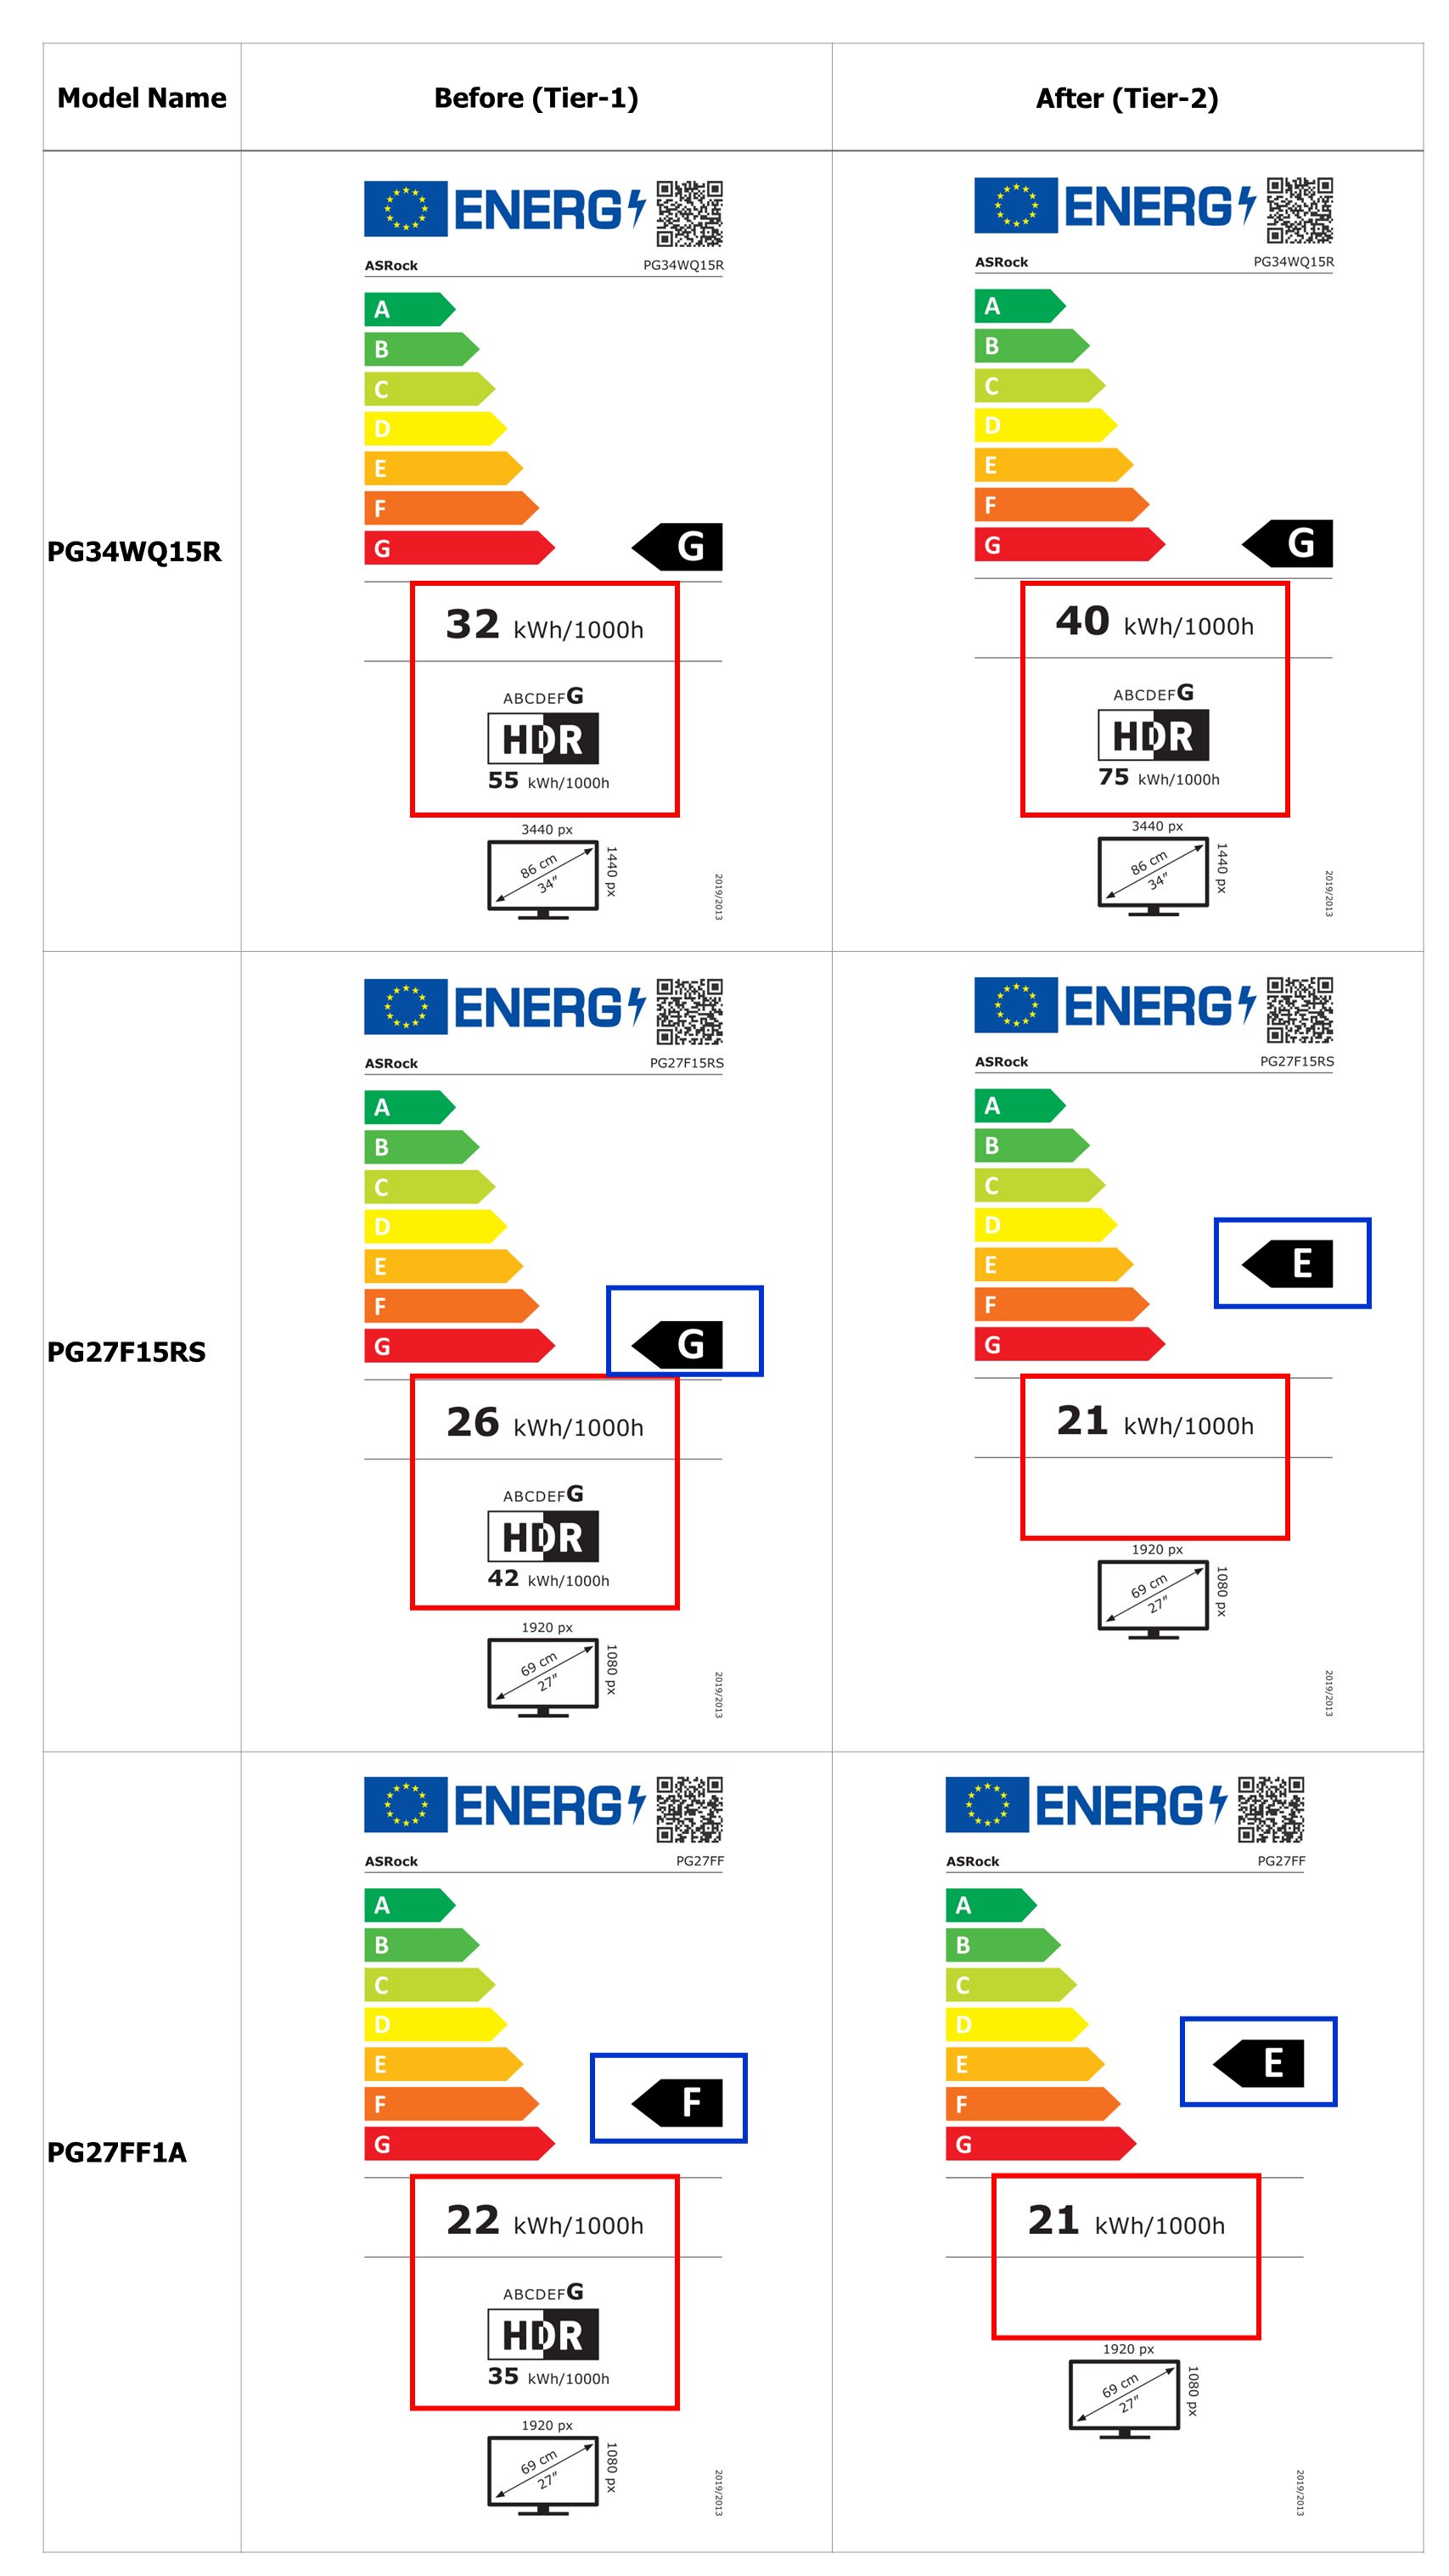 Is it abnormal the European Union Energy Label on the package of the monitor I purchased seems inconsistent with the QR Code website?